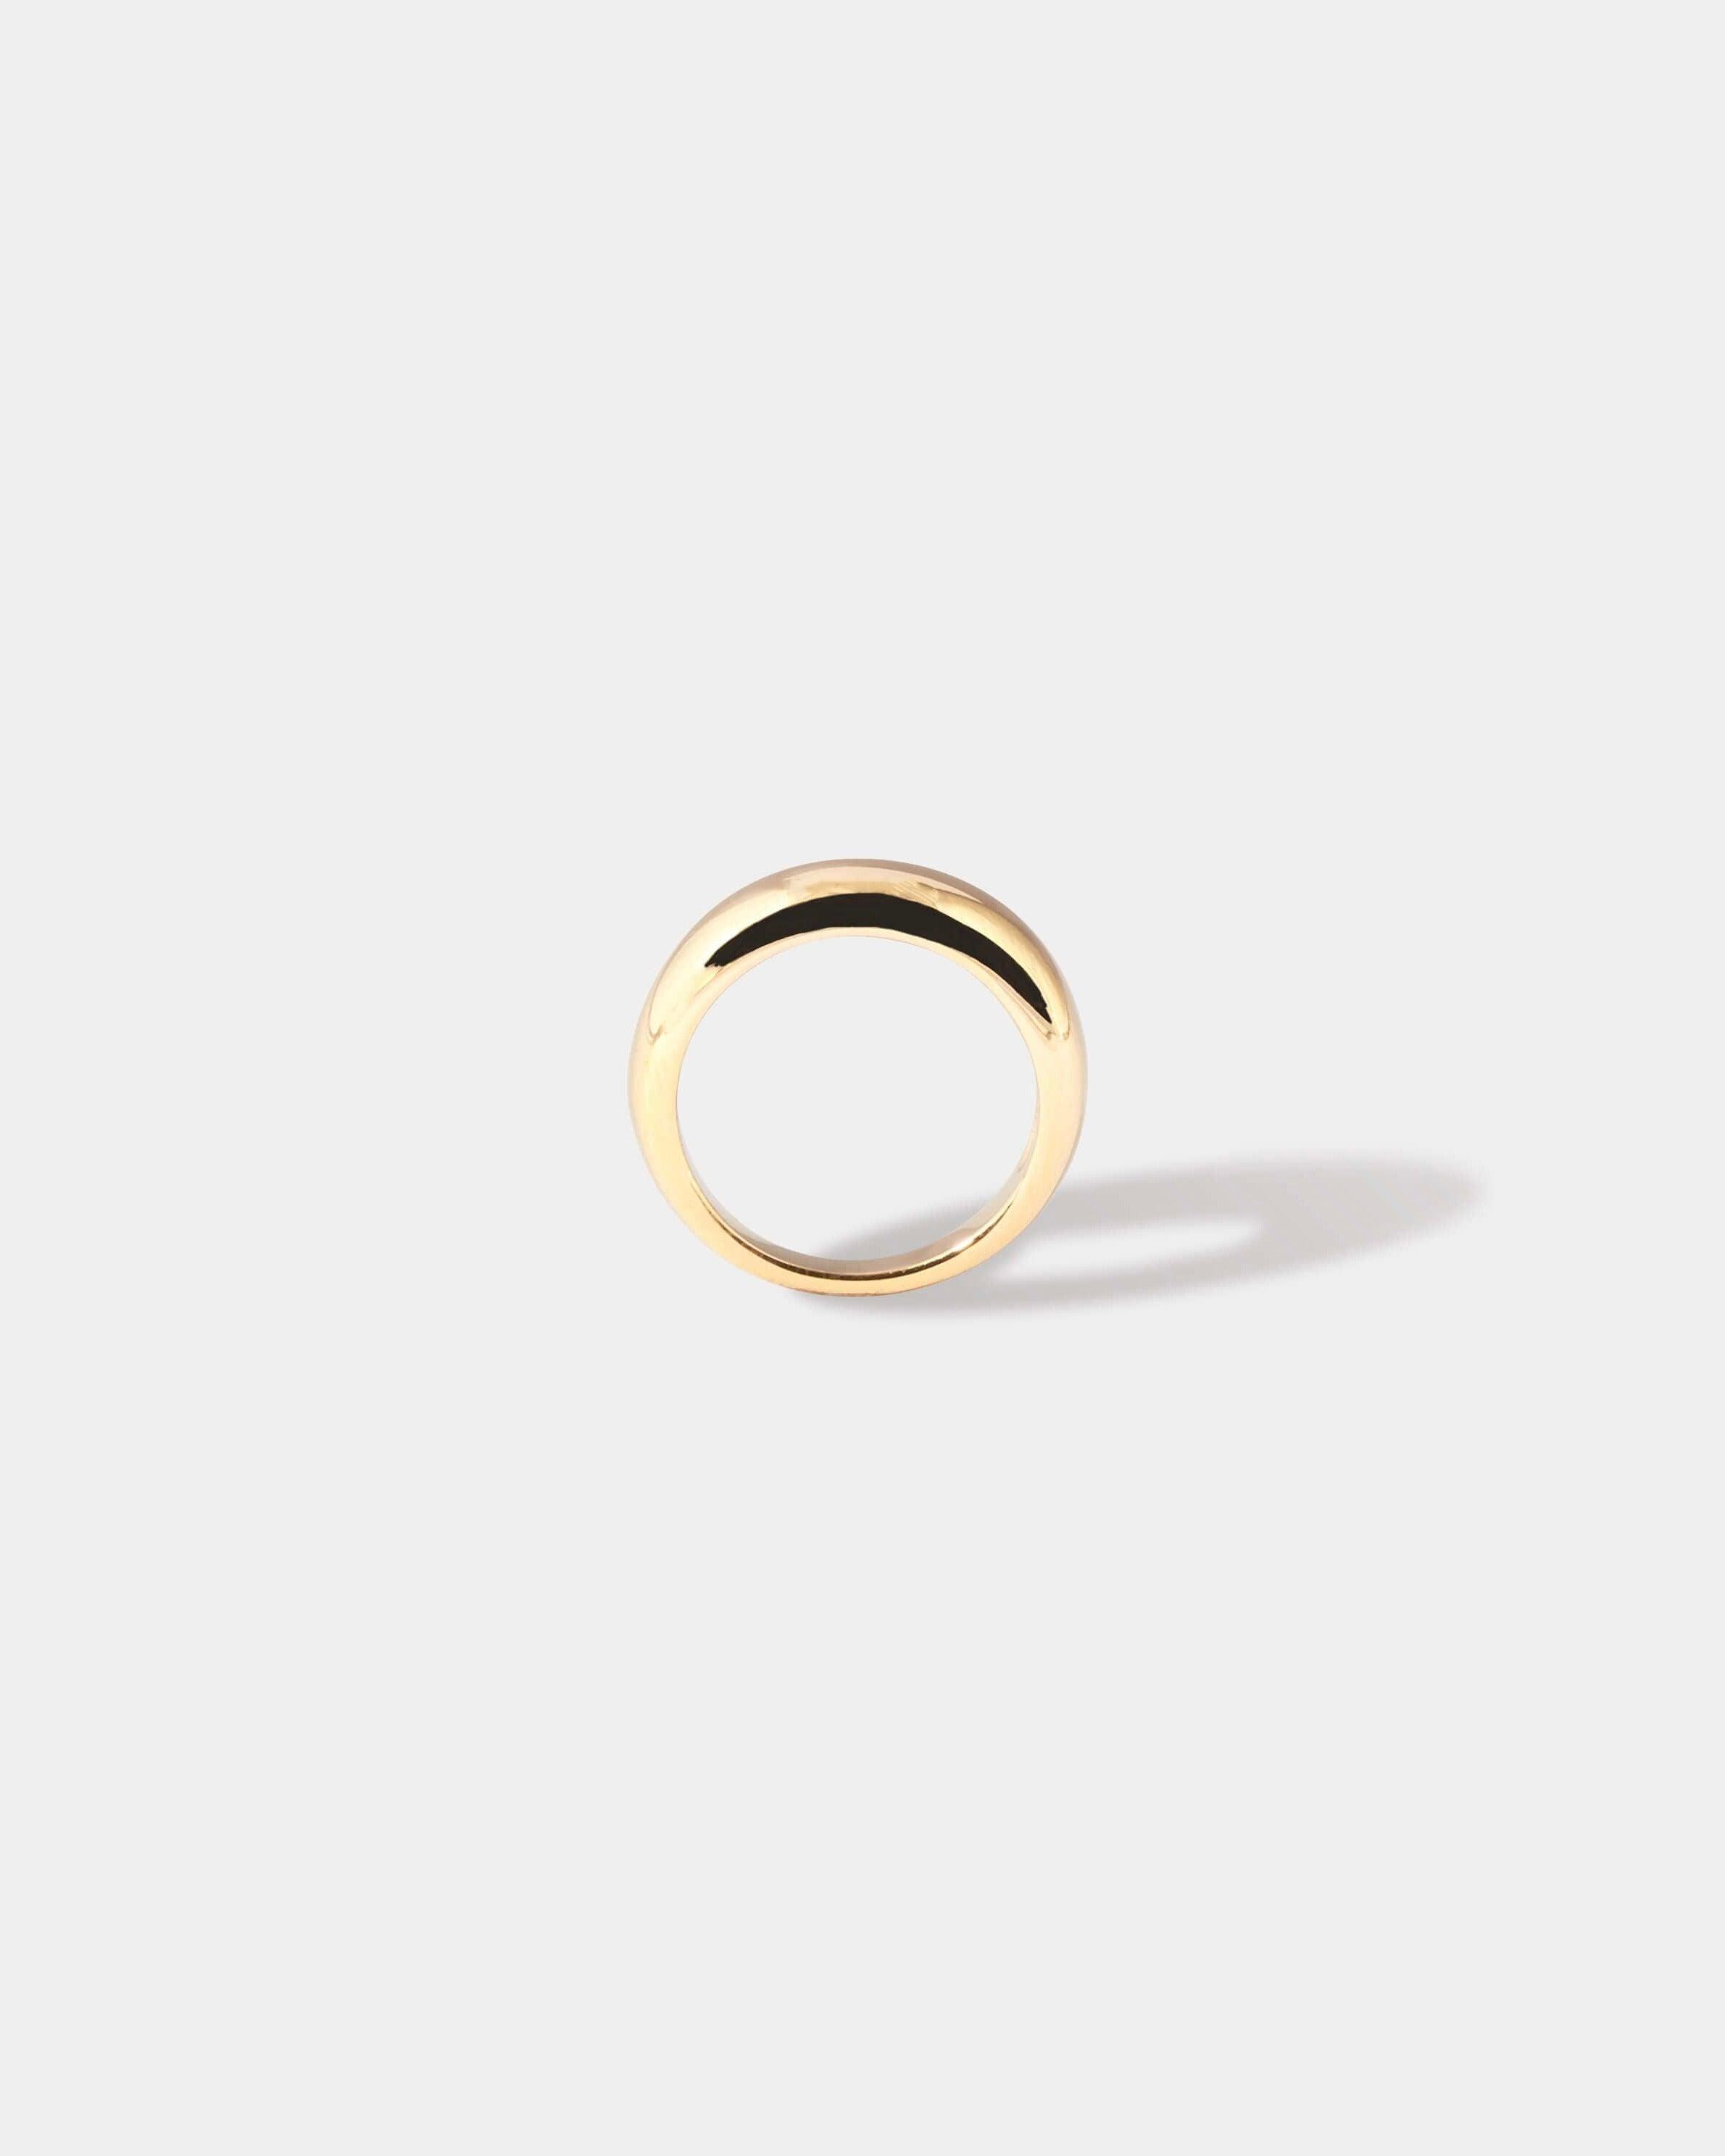 SIMPLE ROUND RING - LIMELY